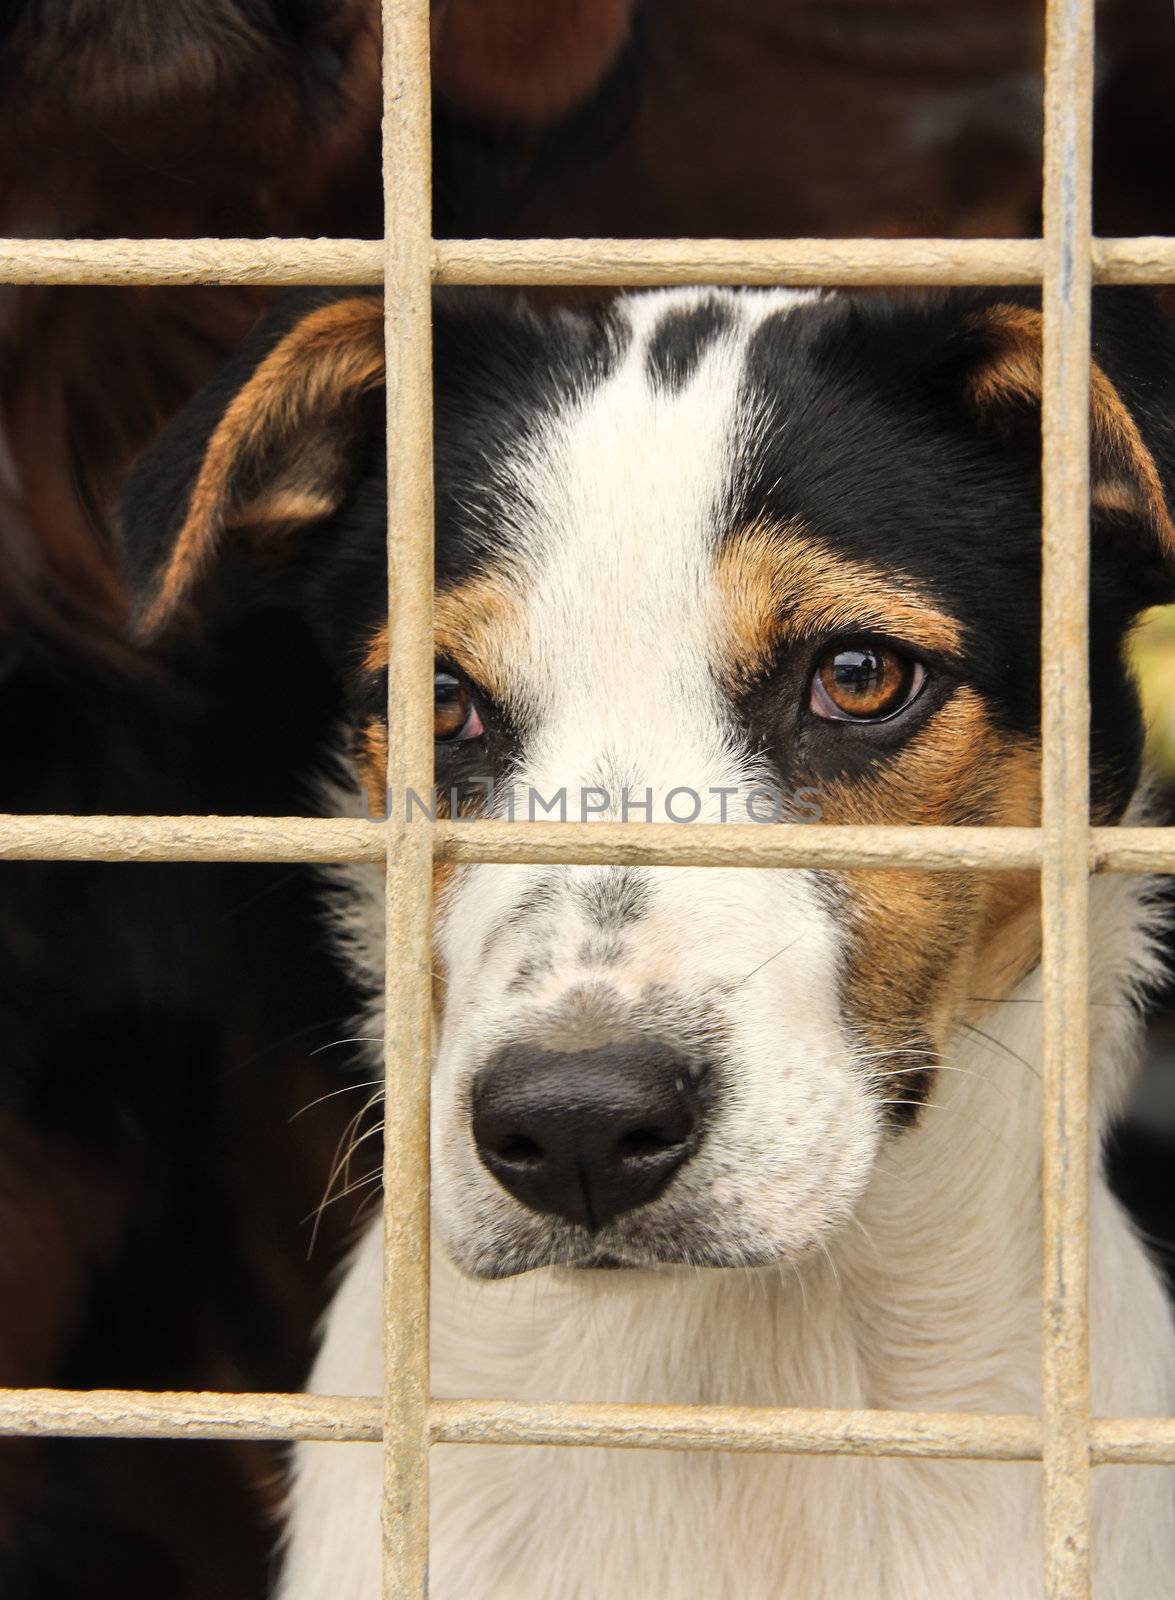 the potrait of a sad looking dog in an iron cage